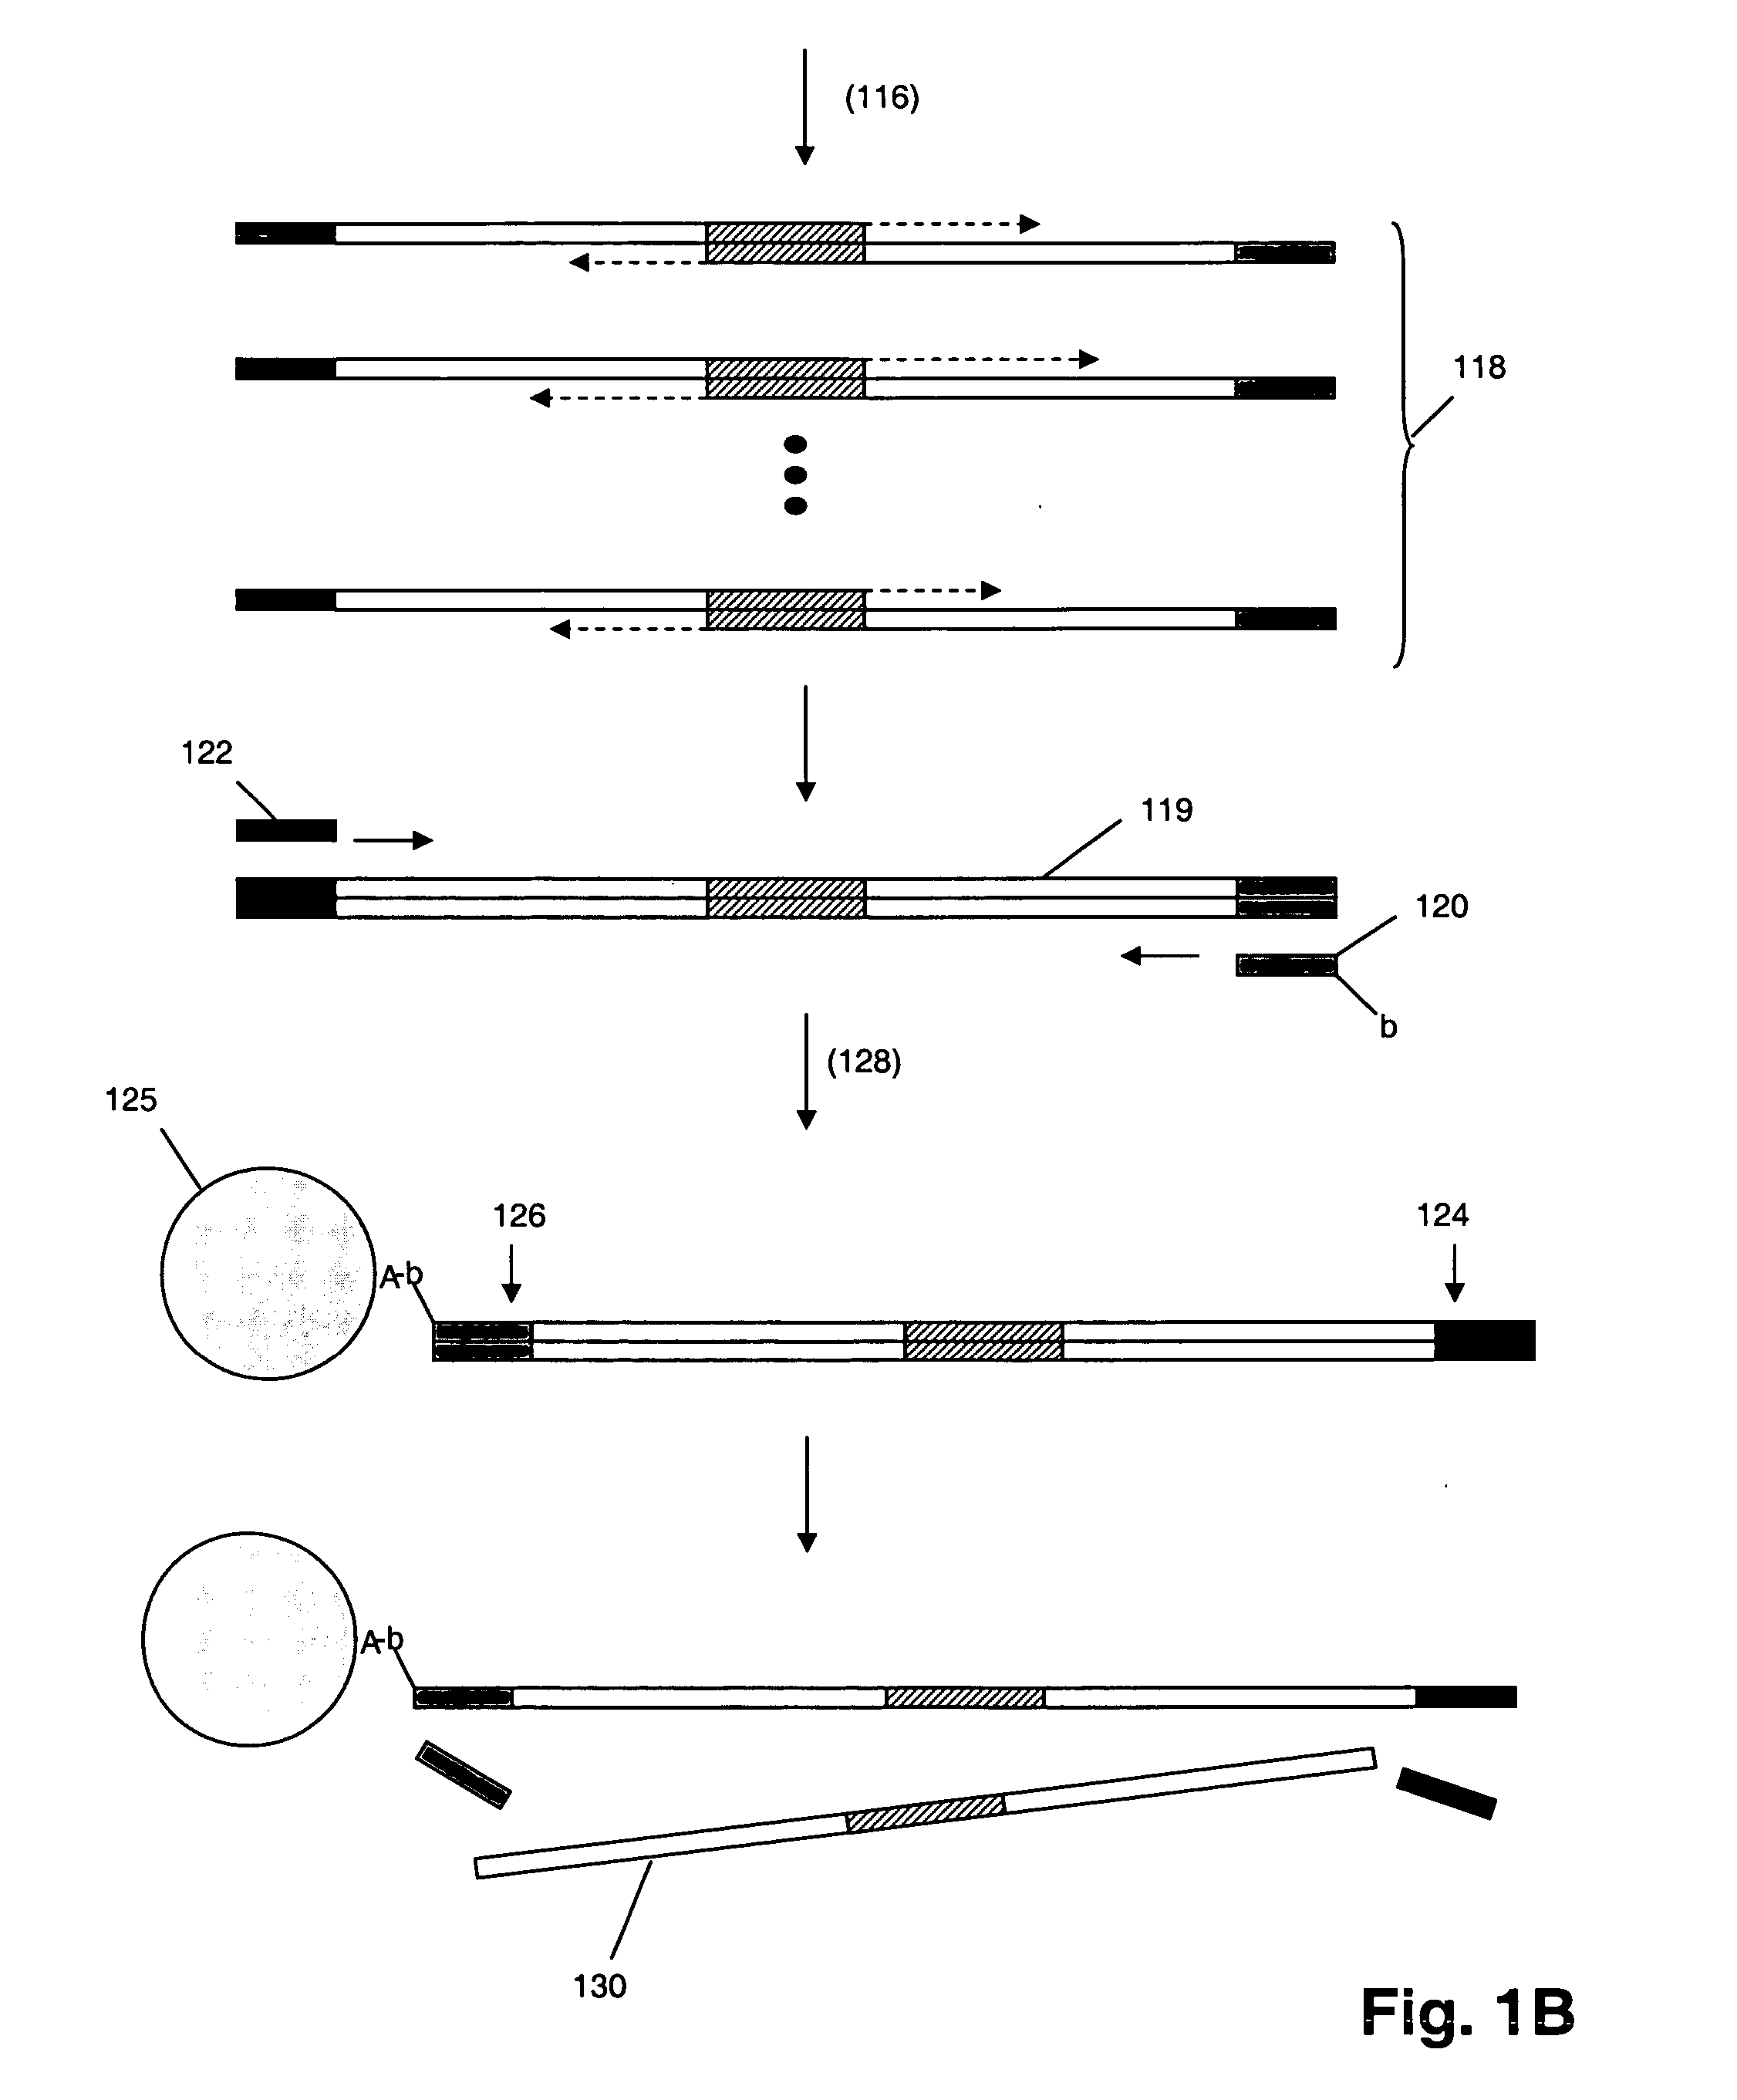 Multiplex polynucleotide synthesis